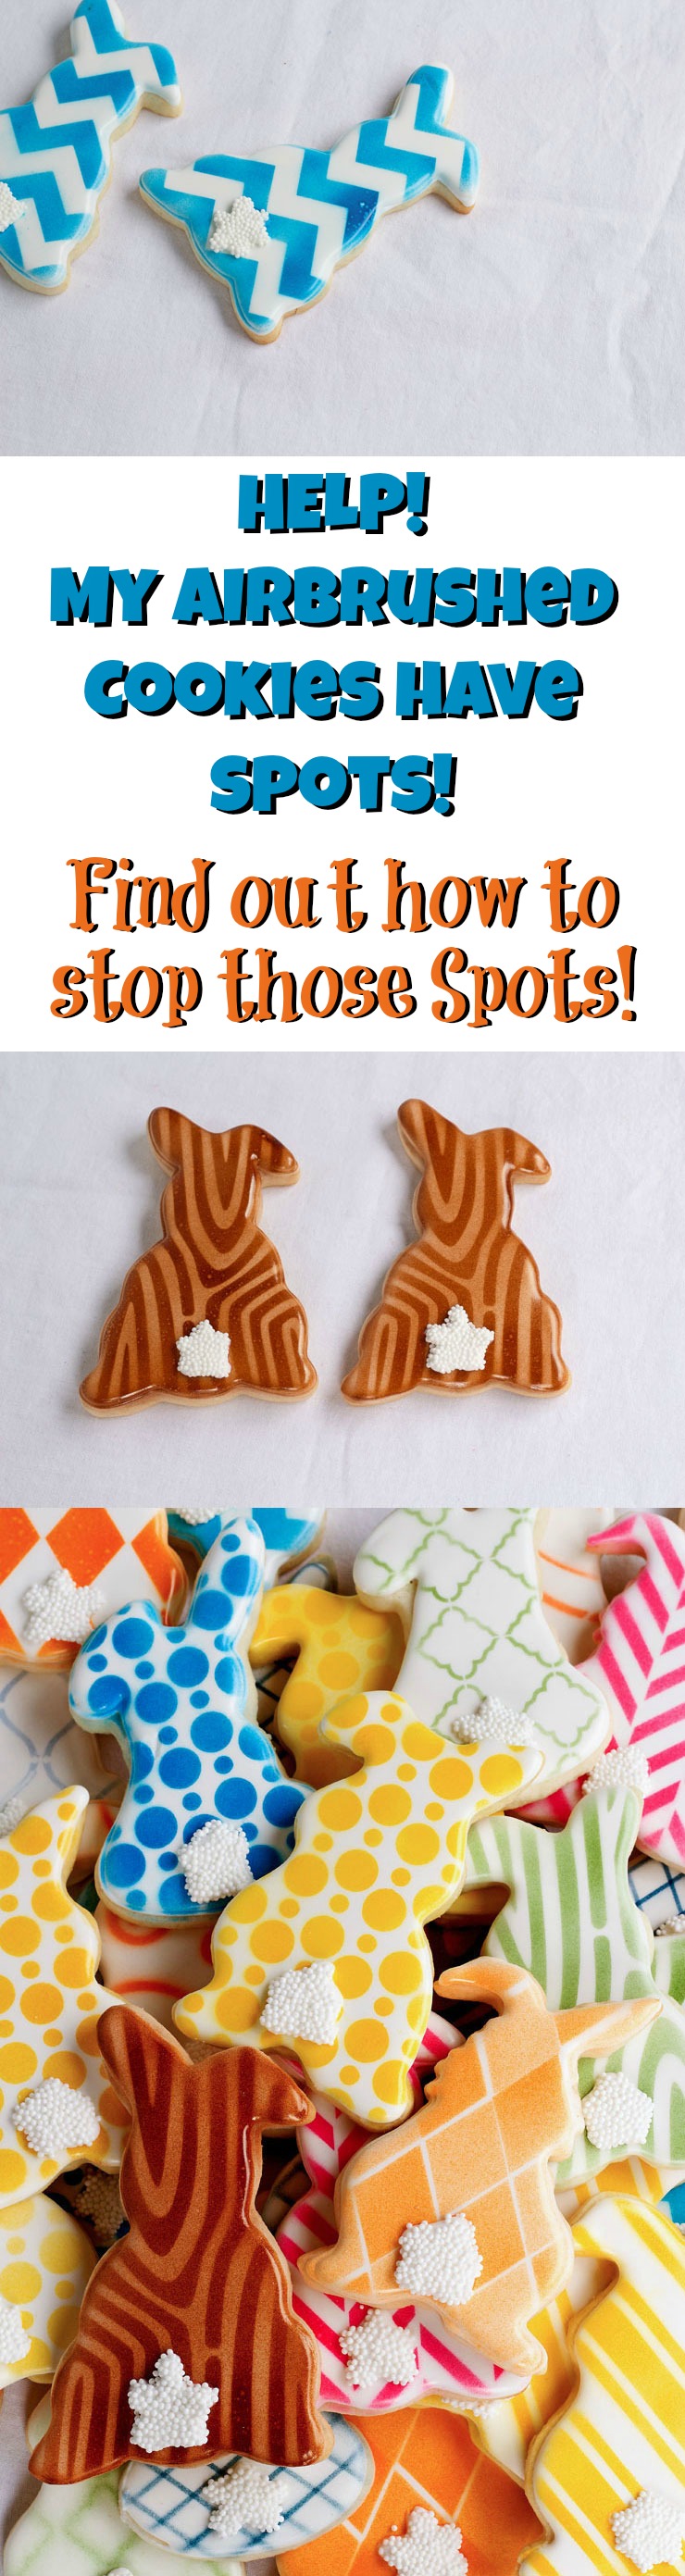 Stop Those Airbrush Gun Spots on Your Decorated Sugar Cookies www.thebearfootbaker.com